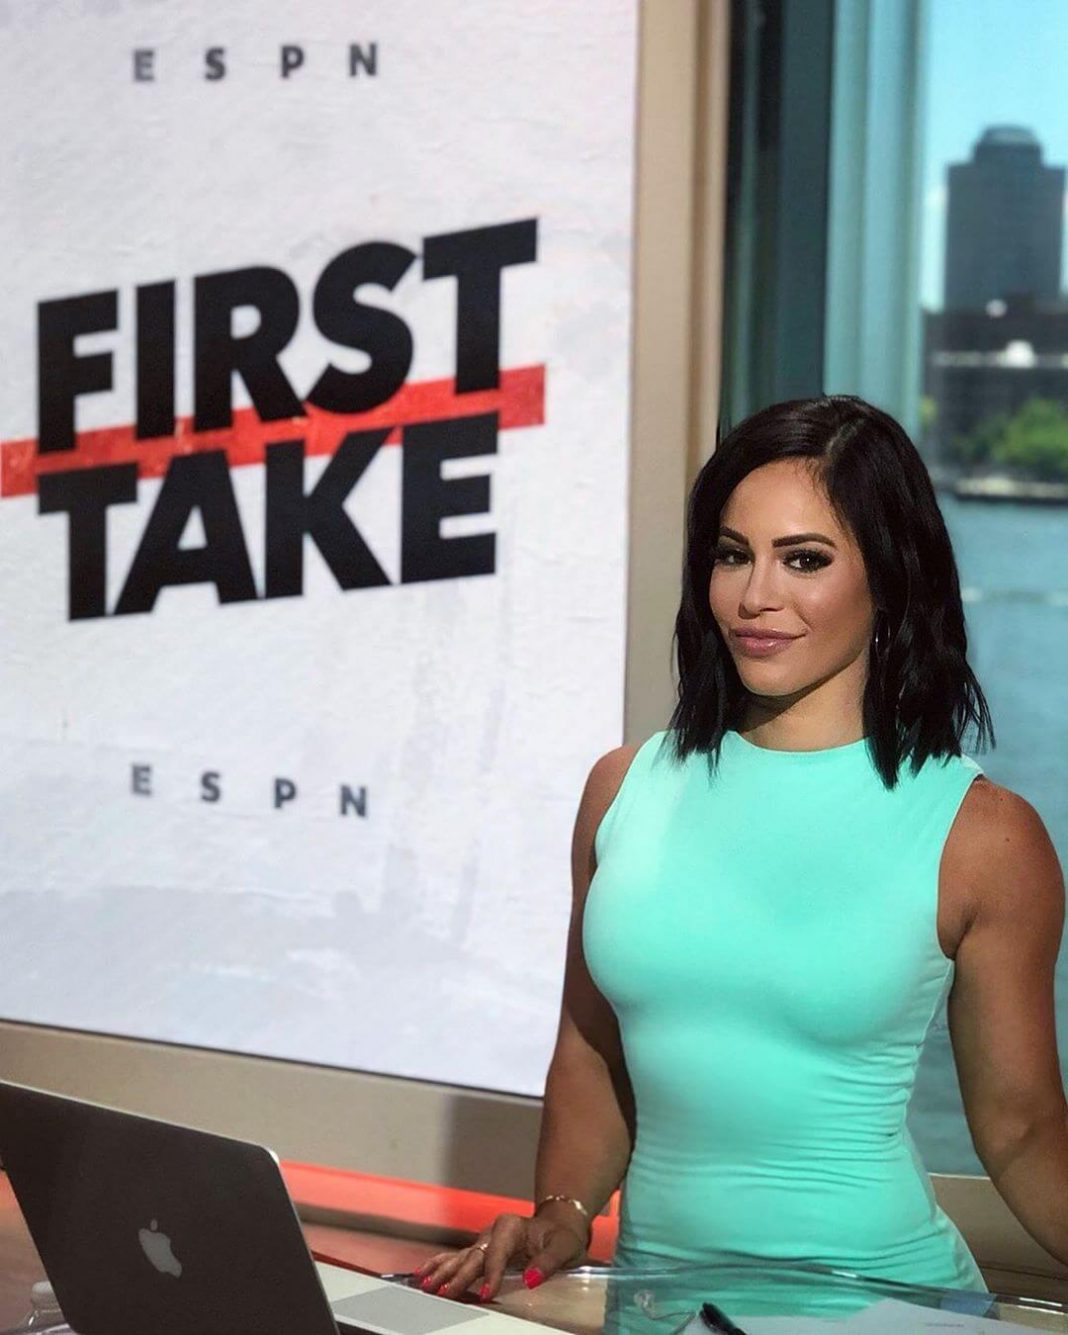 51 Charly Caruso Nude Pictures Are Hard To Not Notice Her Beauty 53